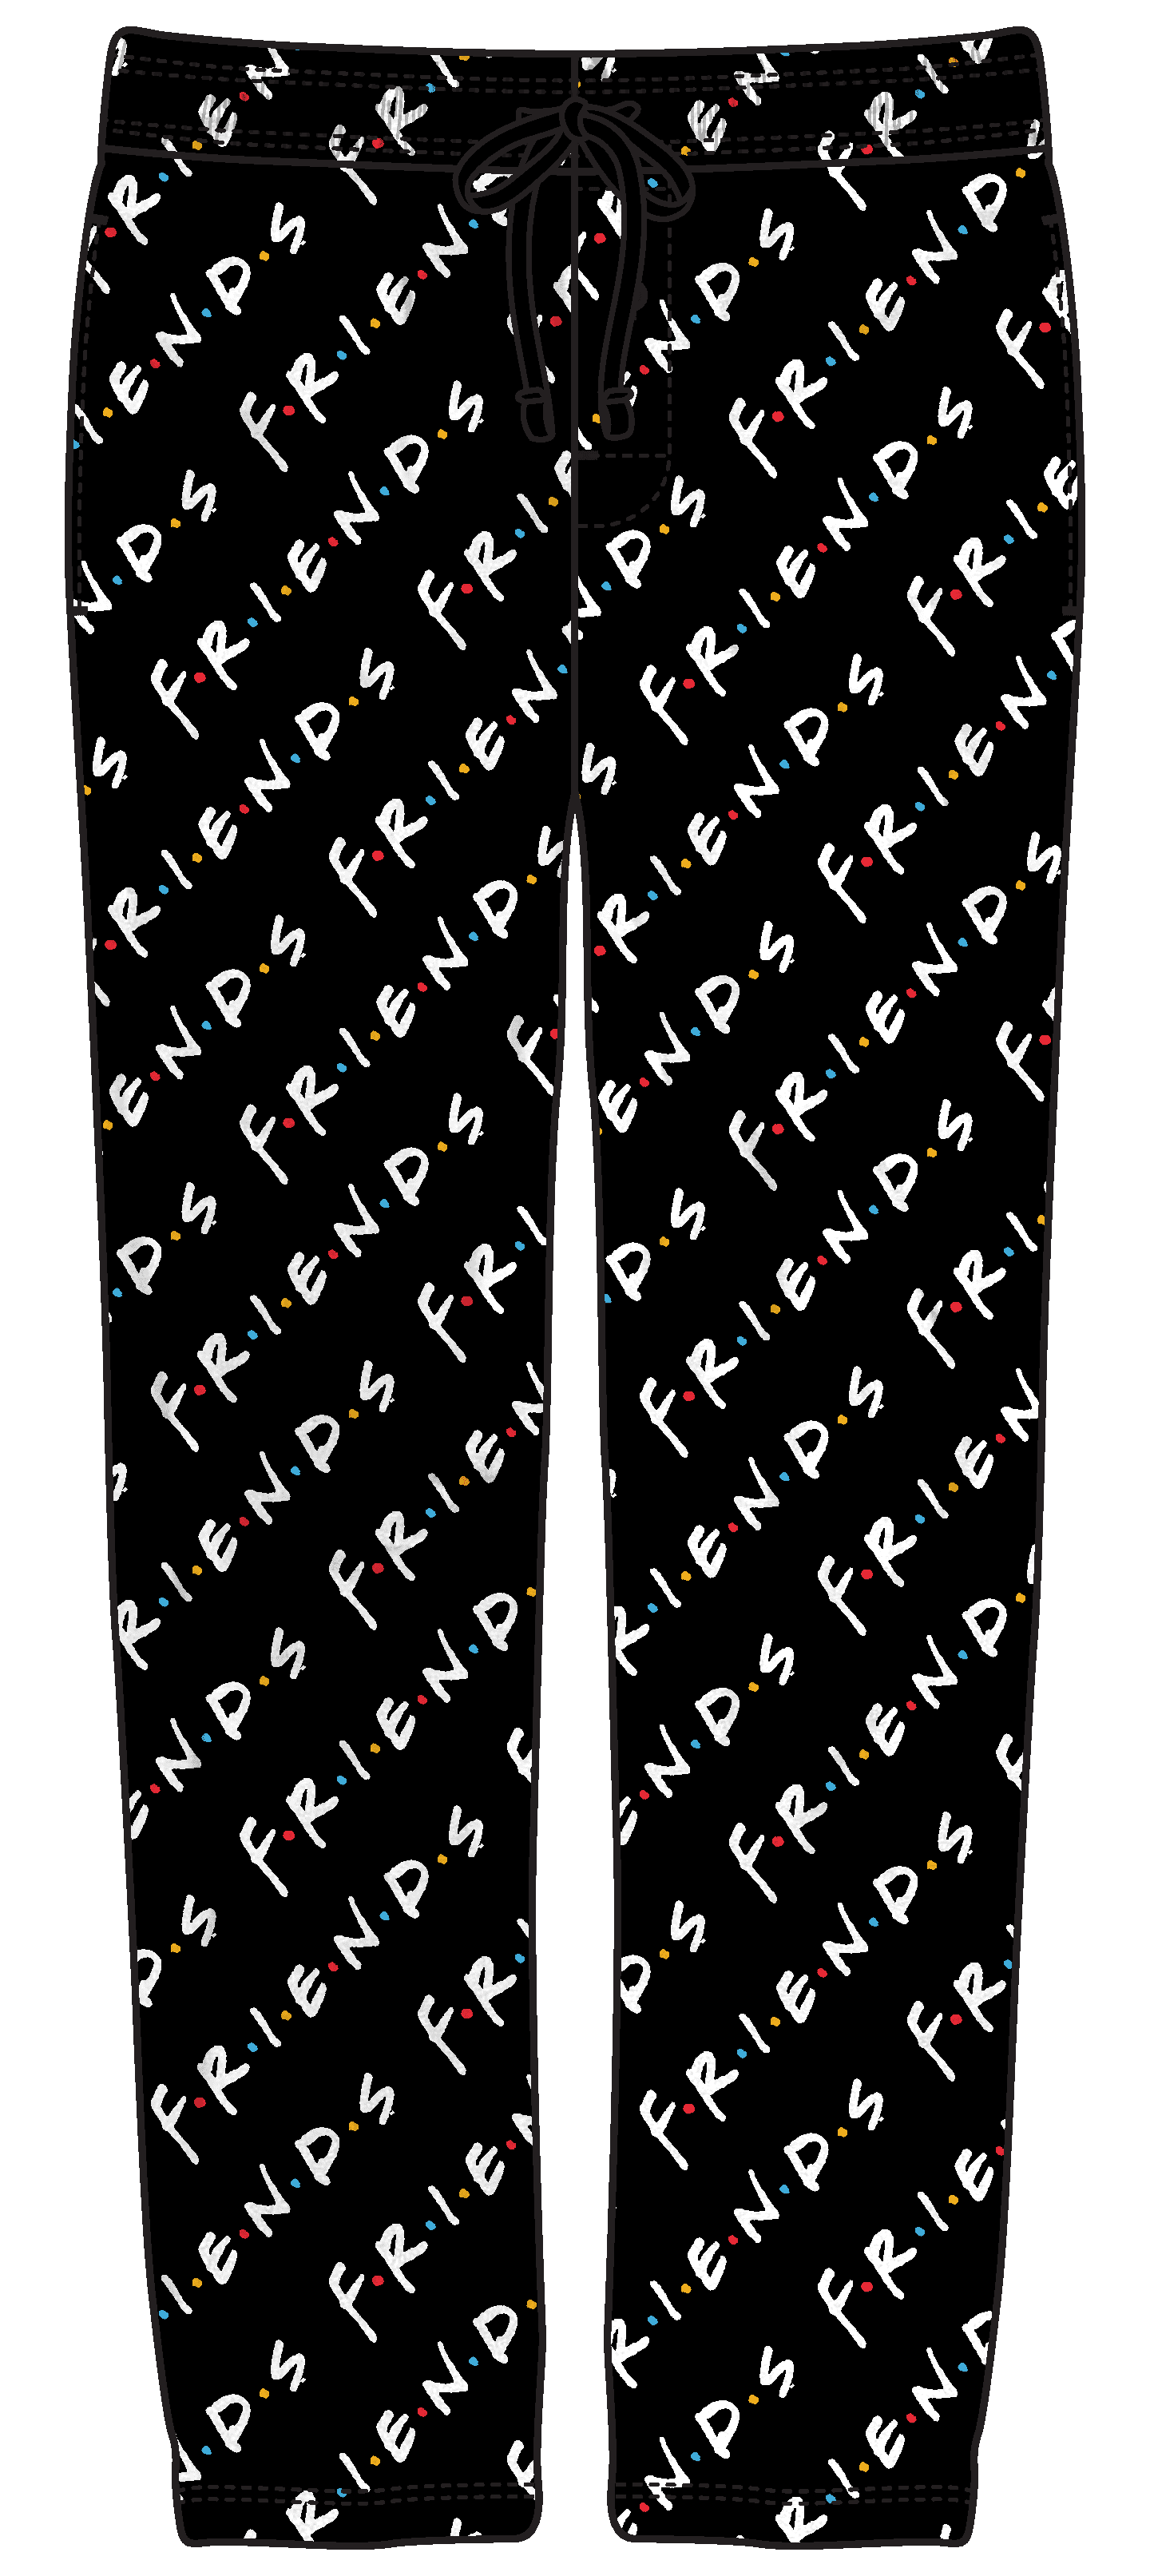 Hot Topic Friends Central Perk Pajama Pants | Mall of America®